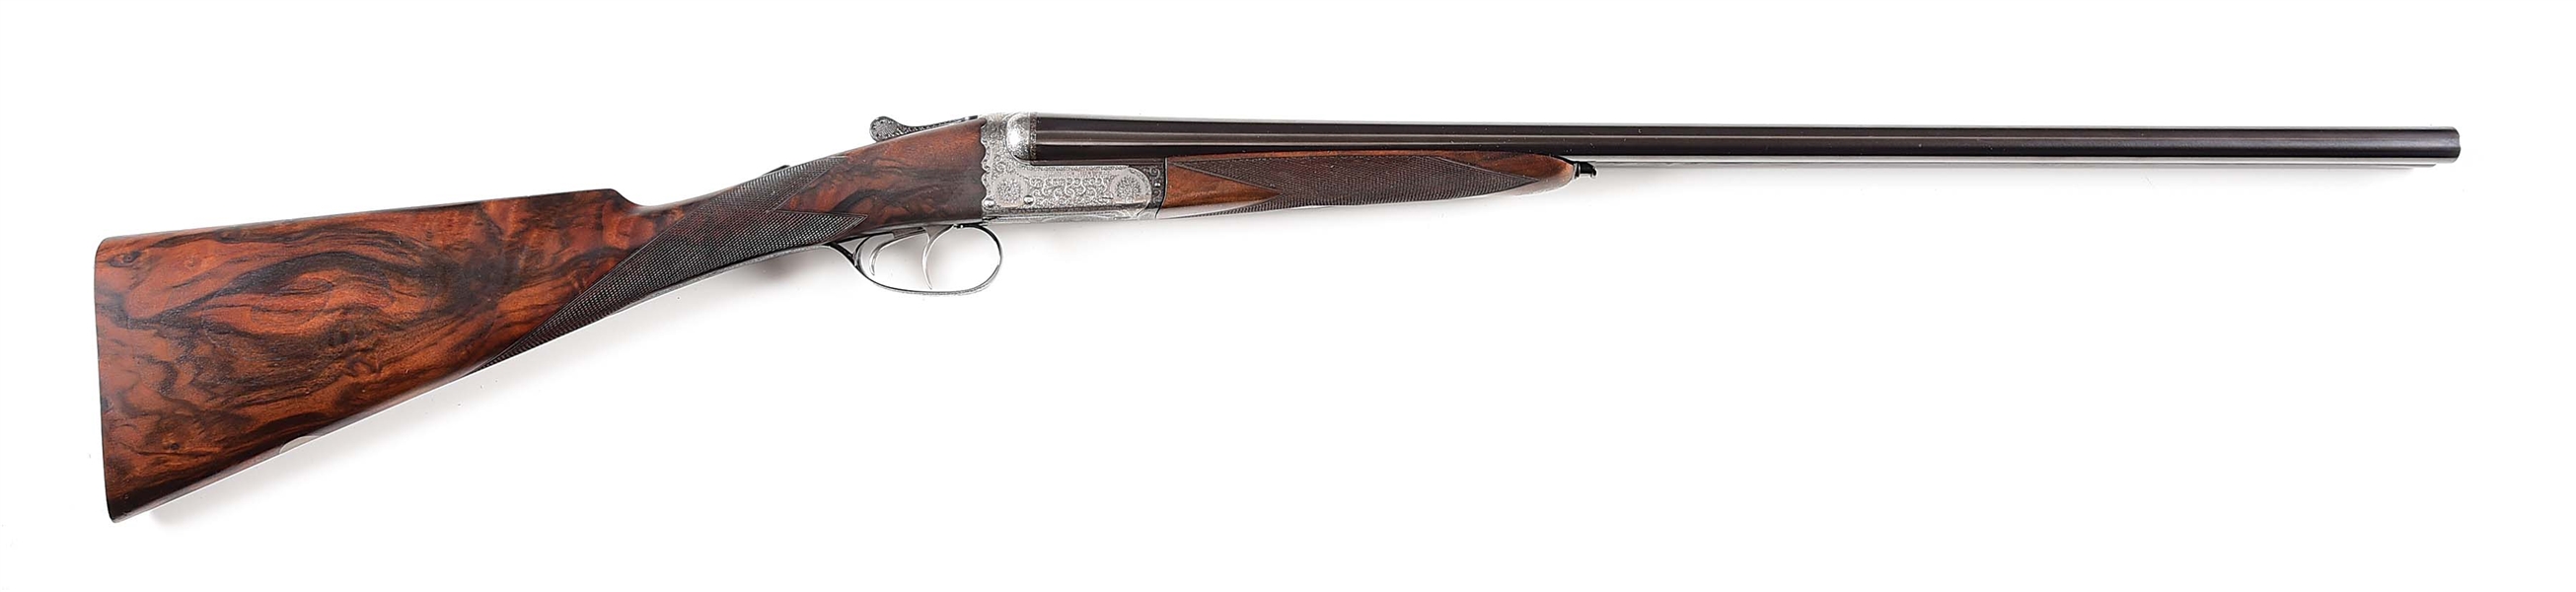 (C) CHARLES BOSWELL BEST BOXLOCK EJECTOR SIDE BY SIDE SHOTGUN.